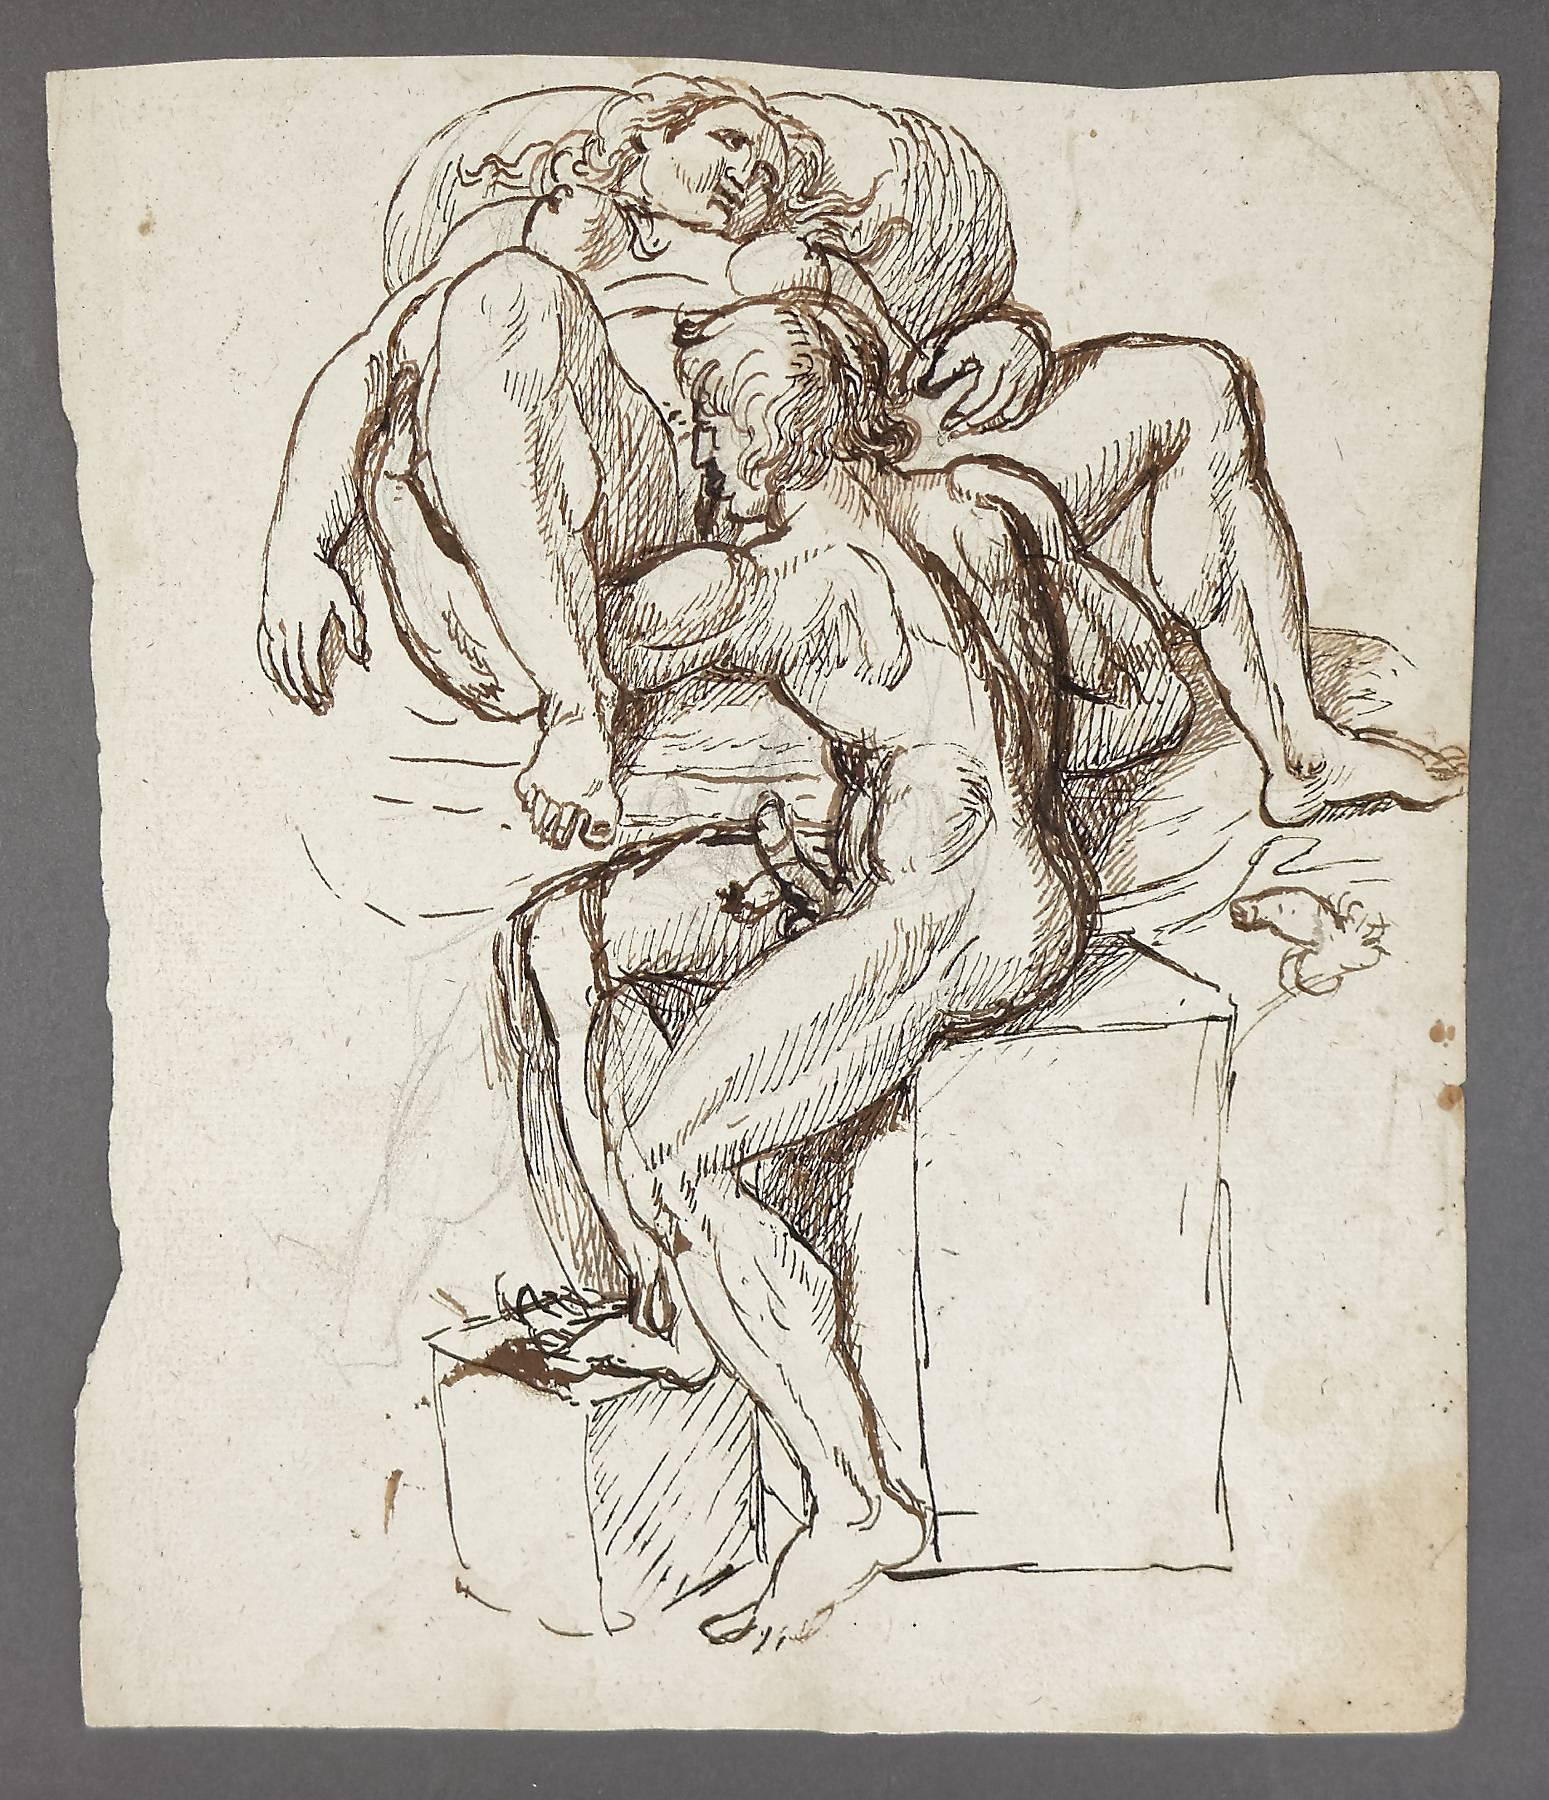 Rare 18th century Old master drawing of an explicit erotic scene of an couple having oral sex. Brown ink on paper with watermark, over pre-studies in black chalk.

Johan Tobias Sergel was born in Stockholm in 1740. He was the son of the decorator,